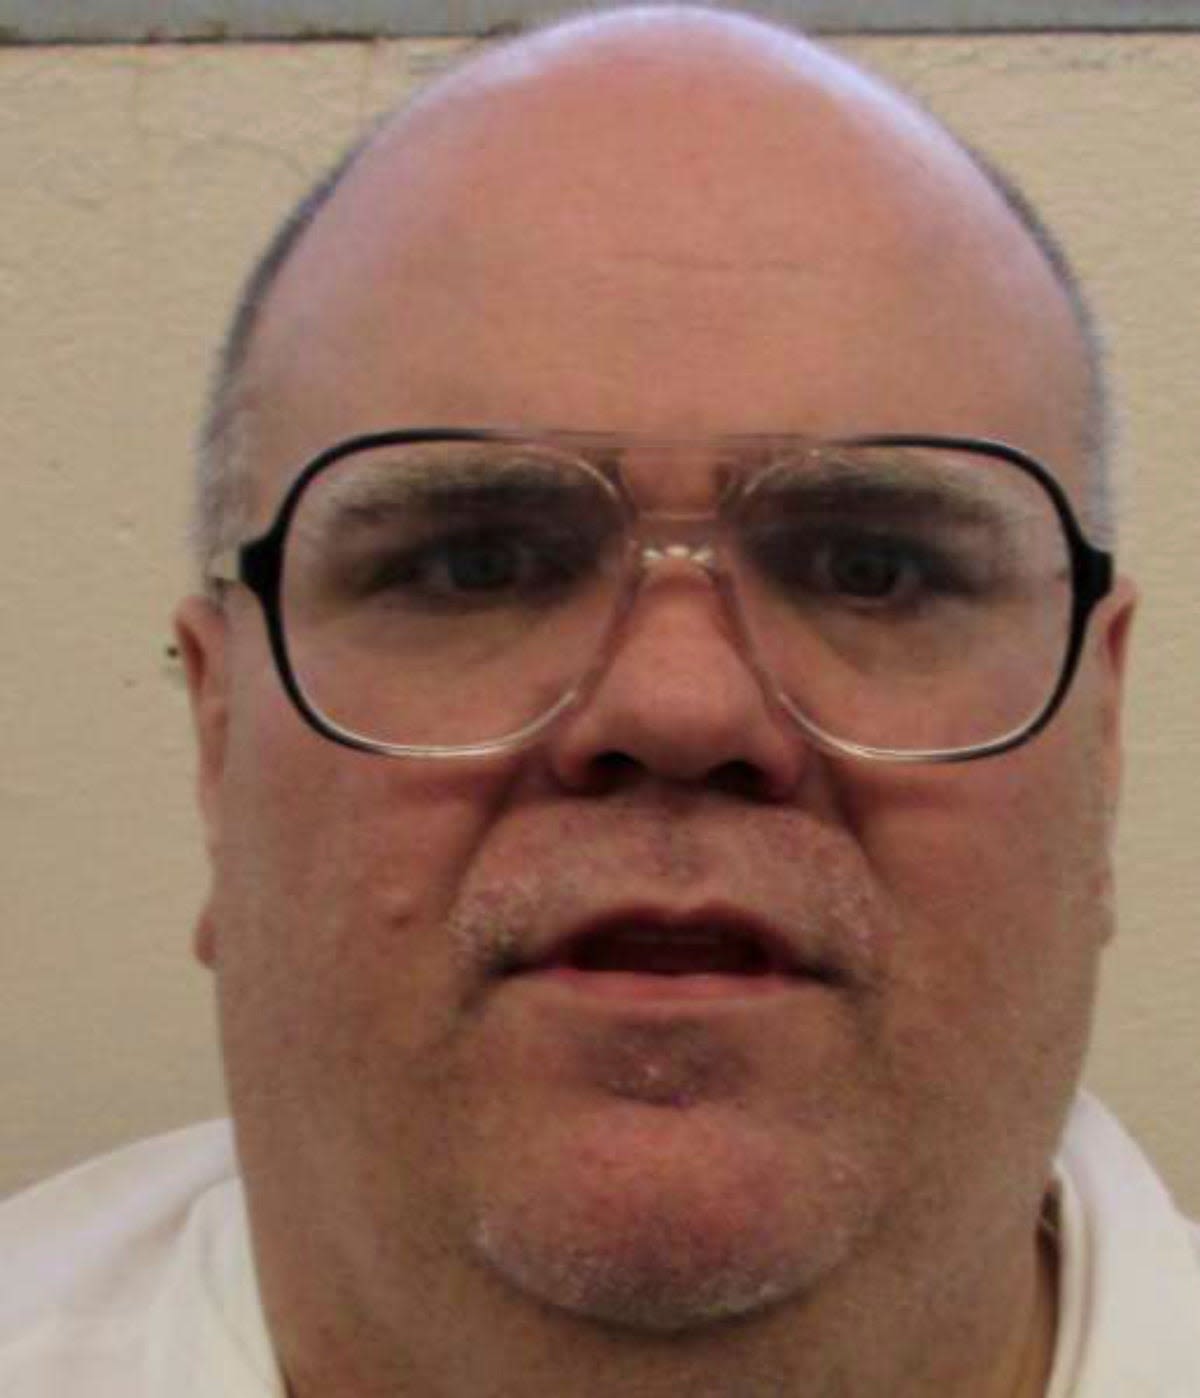 Alabama schedules second nitrogen gas execution for man who survived lethal injection attempt